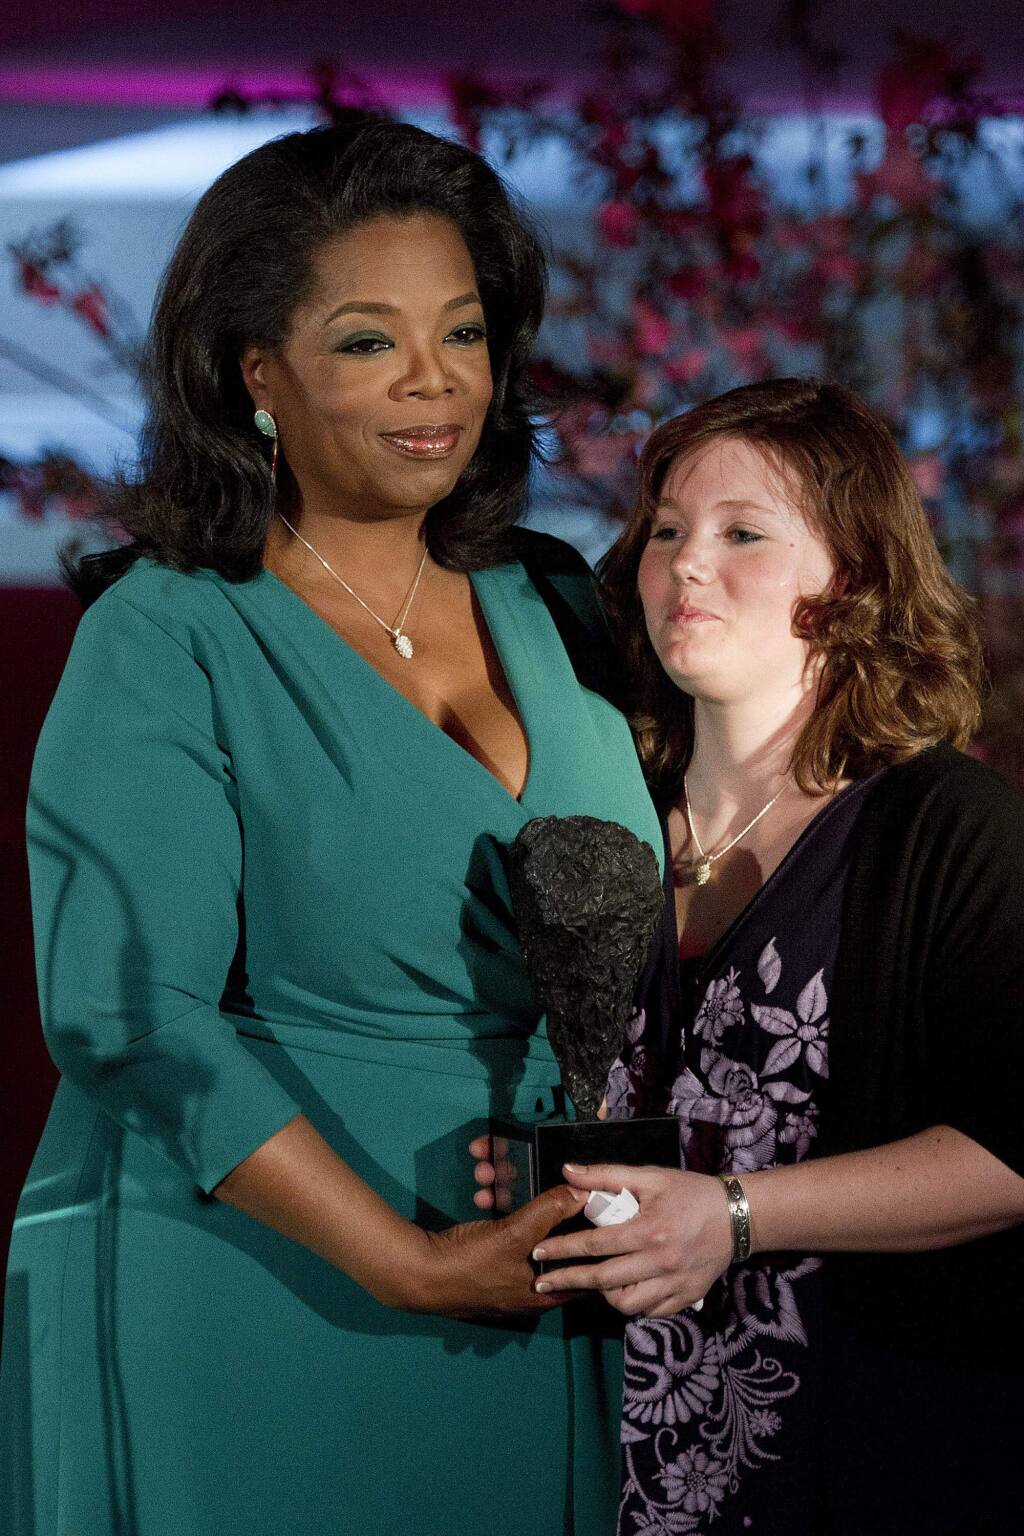 Oprah Winfrey presents Jaycee Dugard with a DVF Award at The Third Annual DVF Awards held at the United Nations in New York, Friday, March 9, 2012. (AP Photo/Charles Sykes)